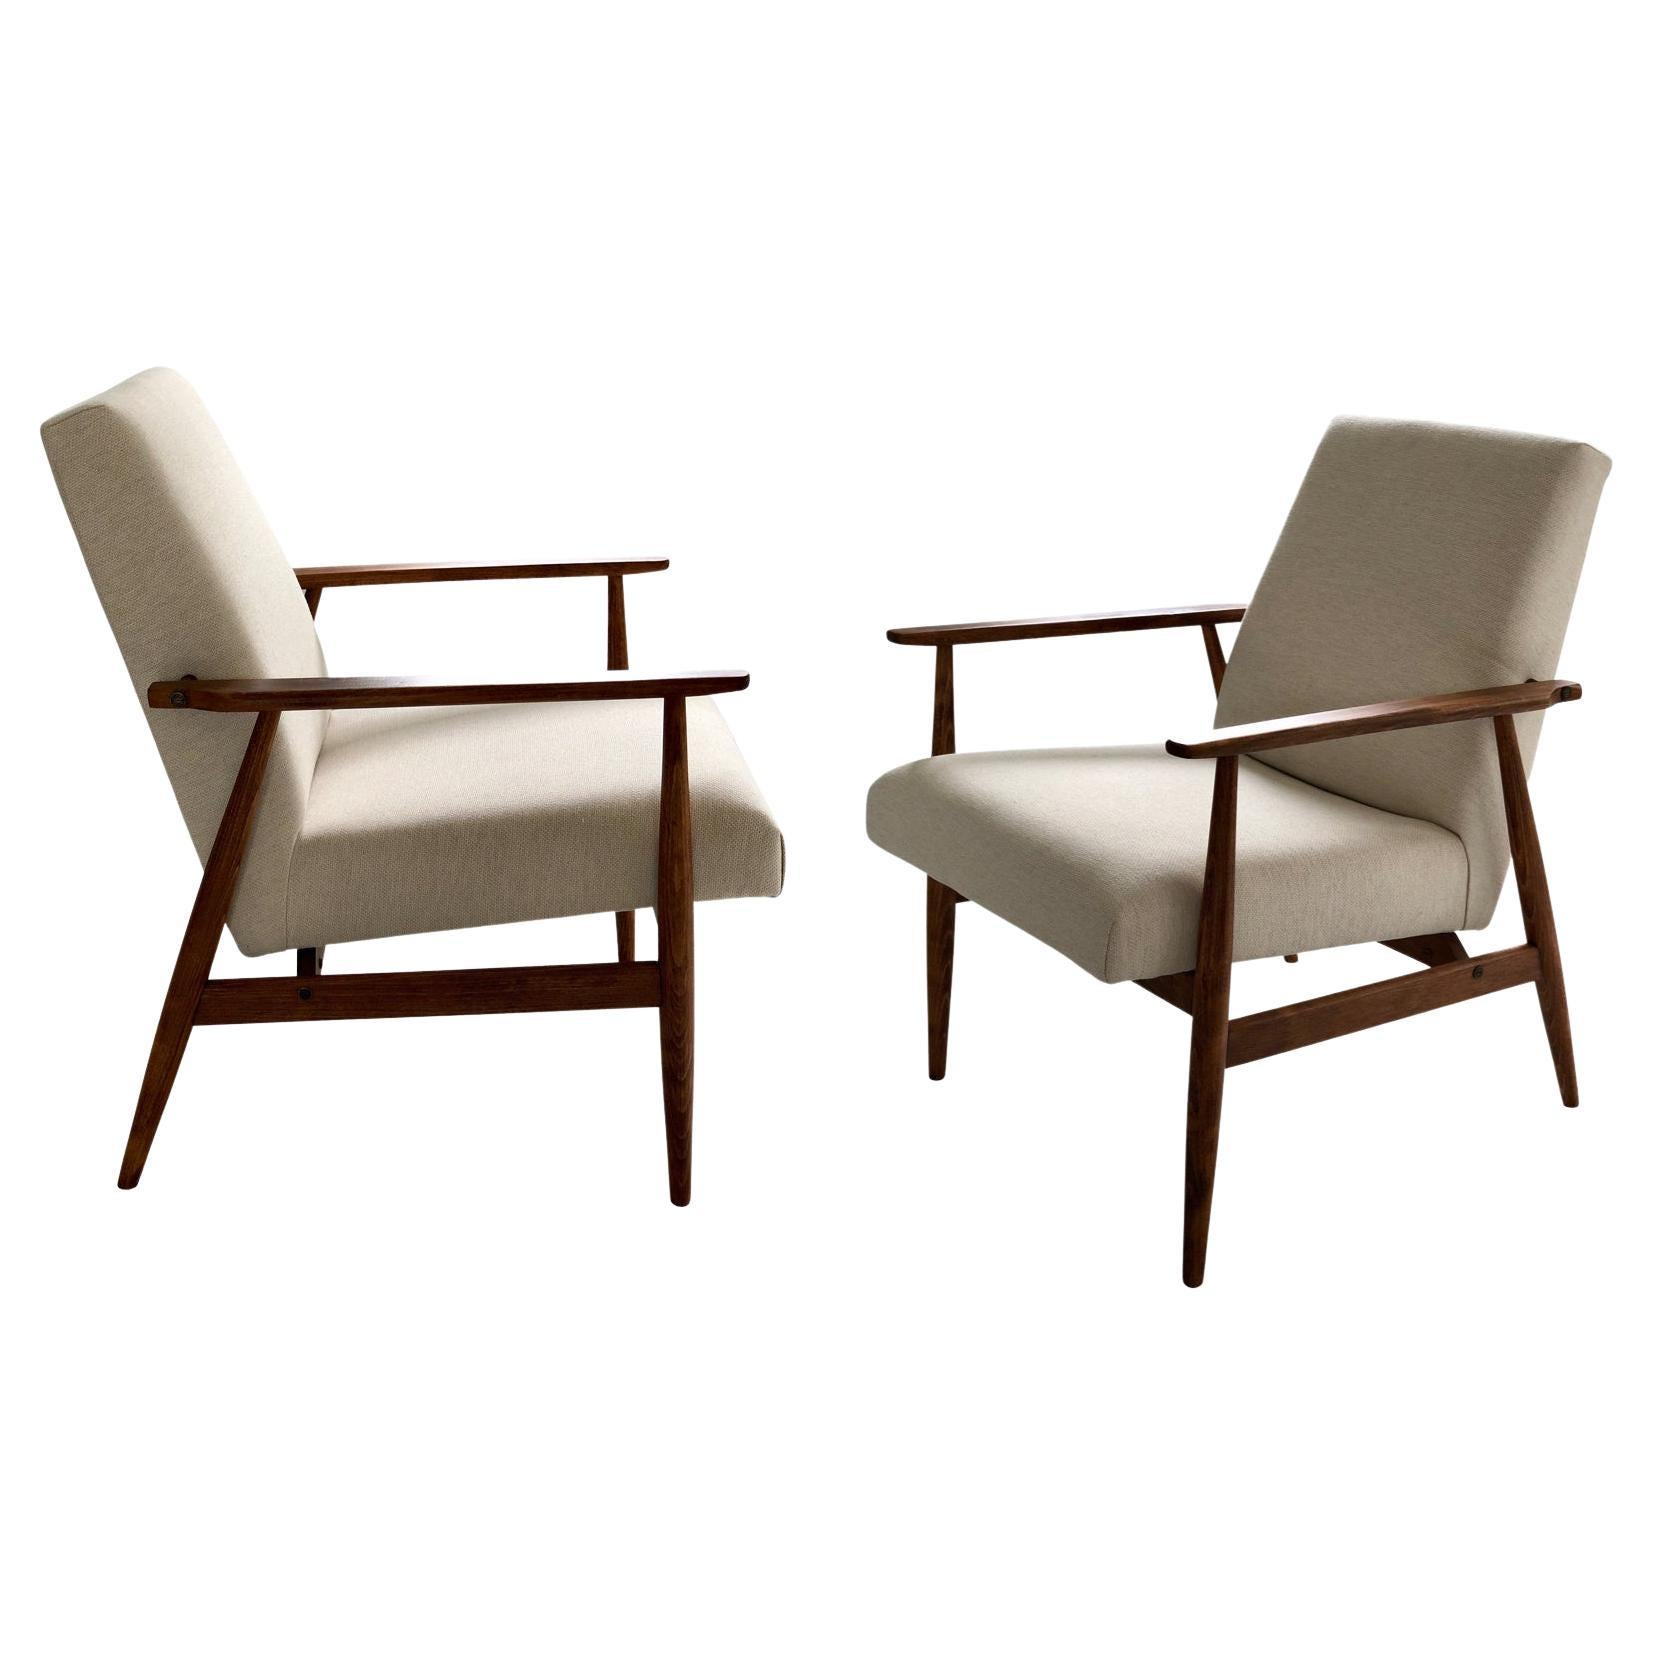 Midcentury Set of Two Beige Armchairs by Henryk Lis, Europe, 1960s